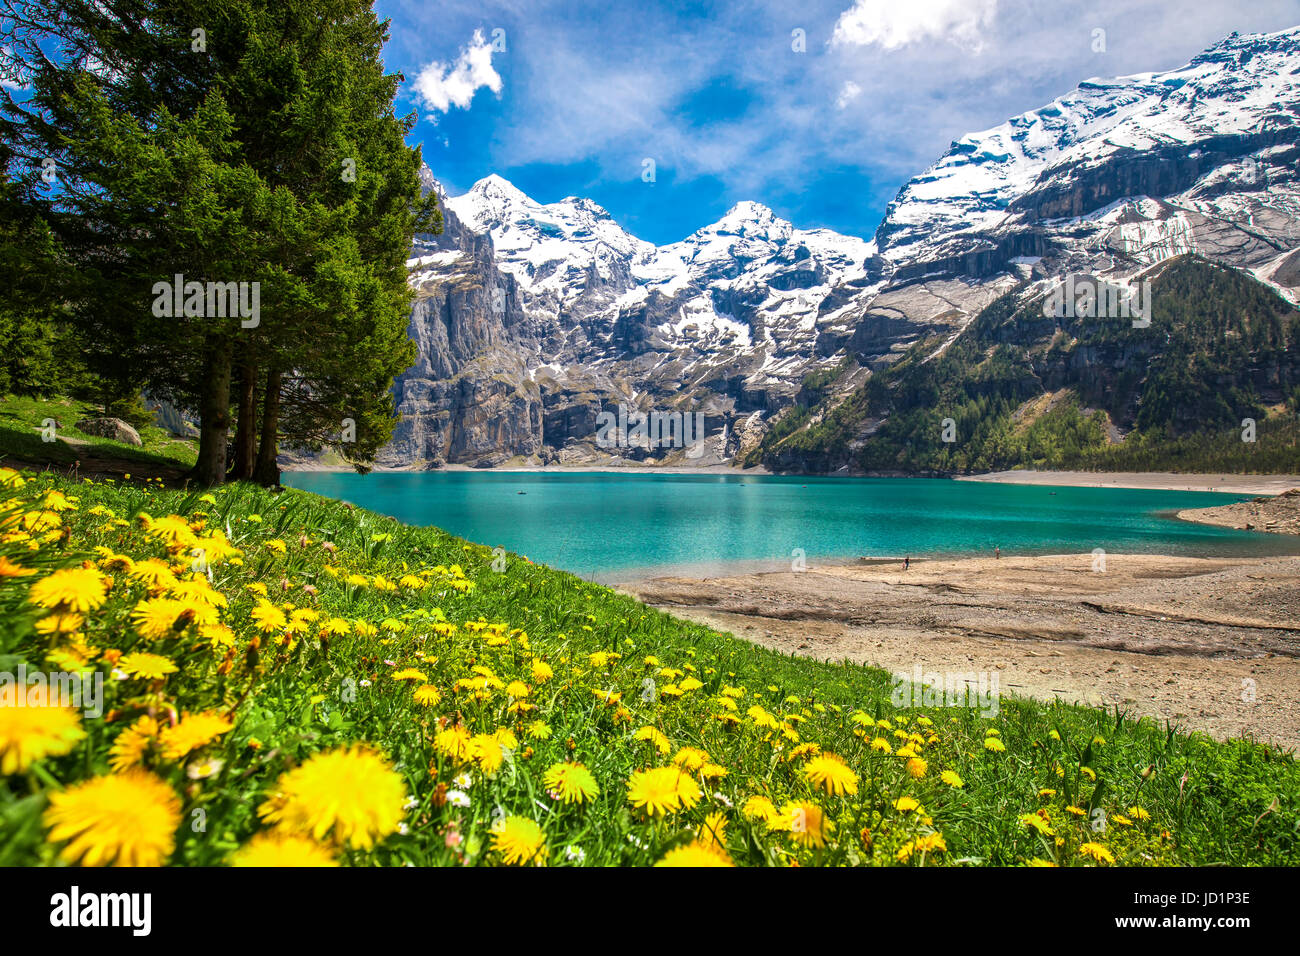 Amazing tourquise Oeschinnensee with waterfalls, wooden chalet and Swiss Alps, Berner Oberland, Switzerland. Stock Photo